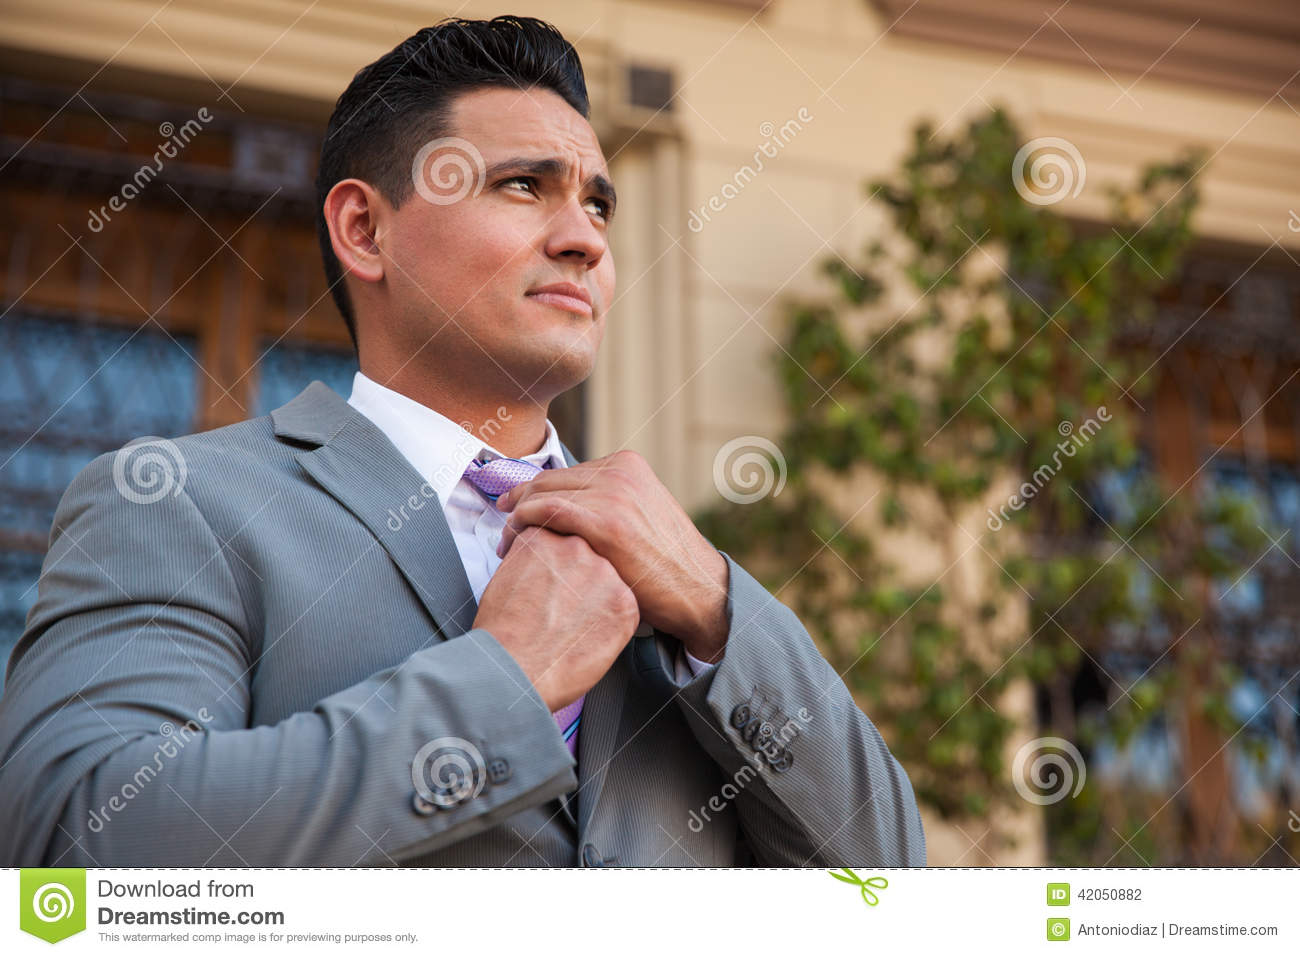 Man In A Suit Fixing His Tie Stock Photo   Image  42050882